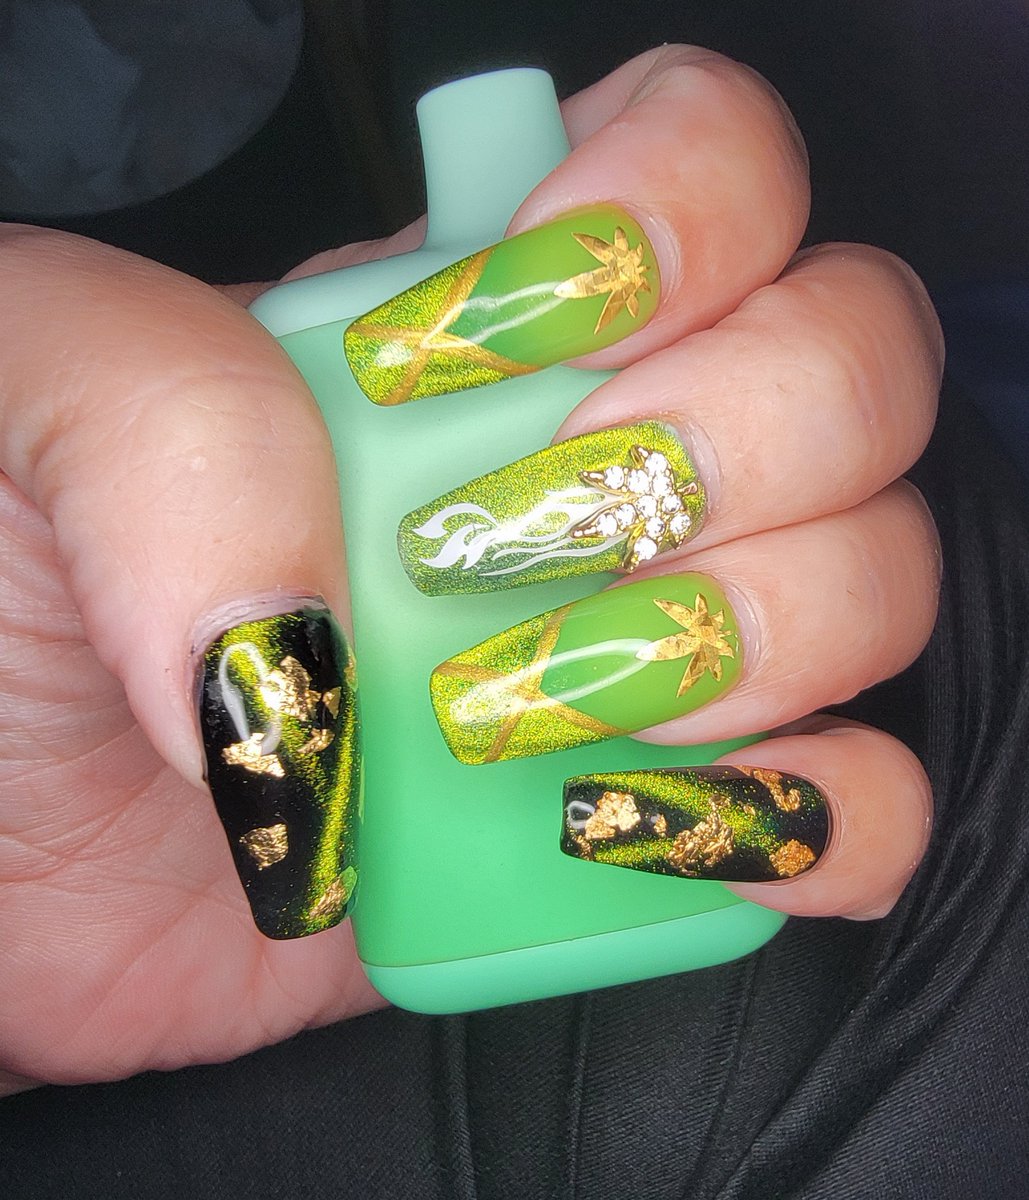 Are you a #stonerbabe, #ganjagoddess, #420domme, or maybe you just want a set of fresh clawz to celebrate your love of Miss Mary Jane?

Hit me up now for your #customnails so you're ready for 4/20!

#smallbusiness #smallbusinesscheck